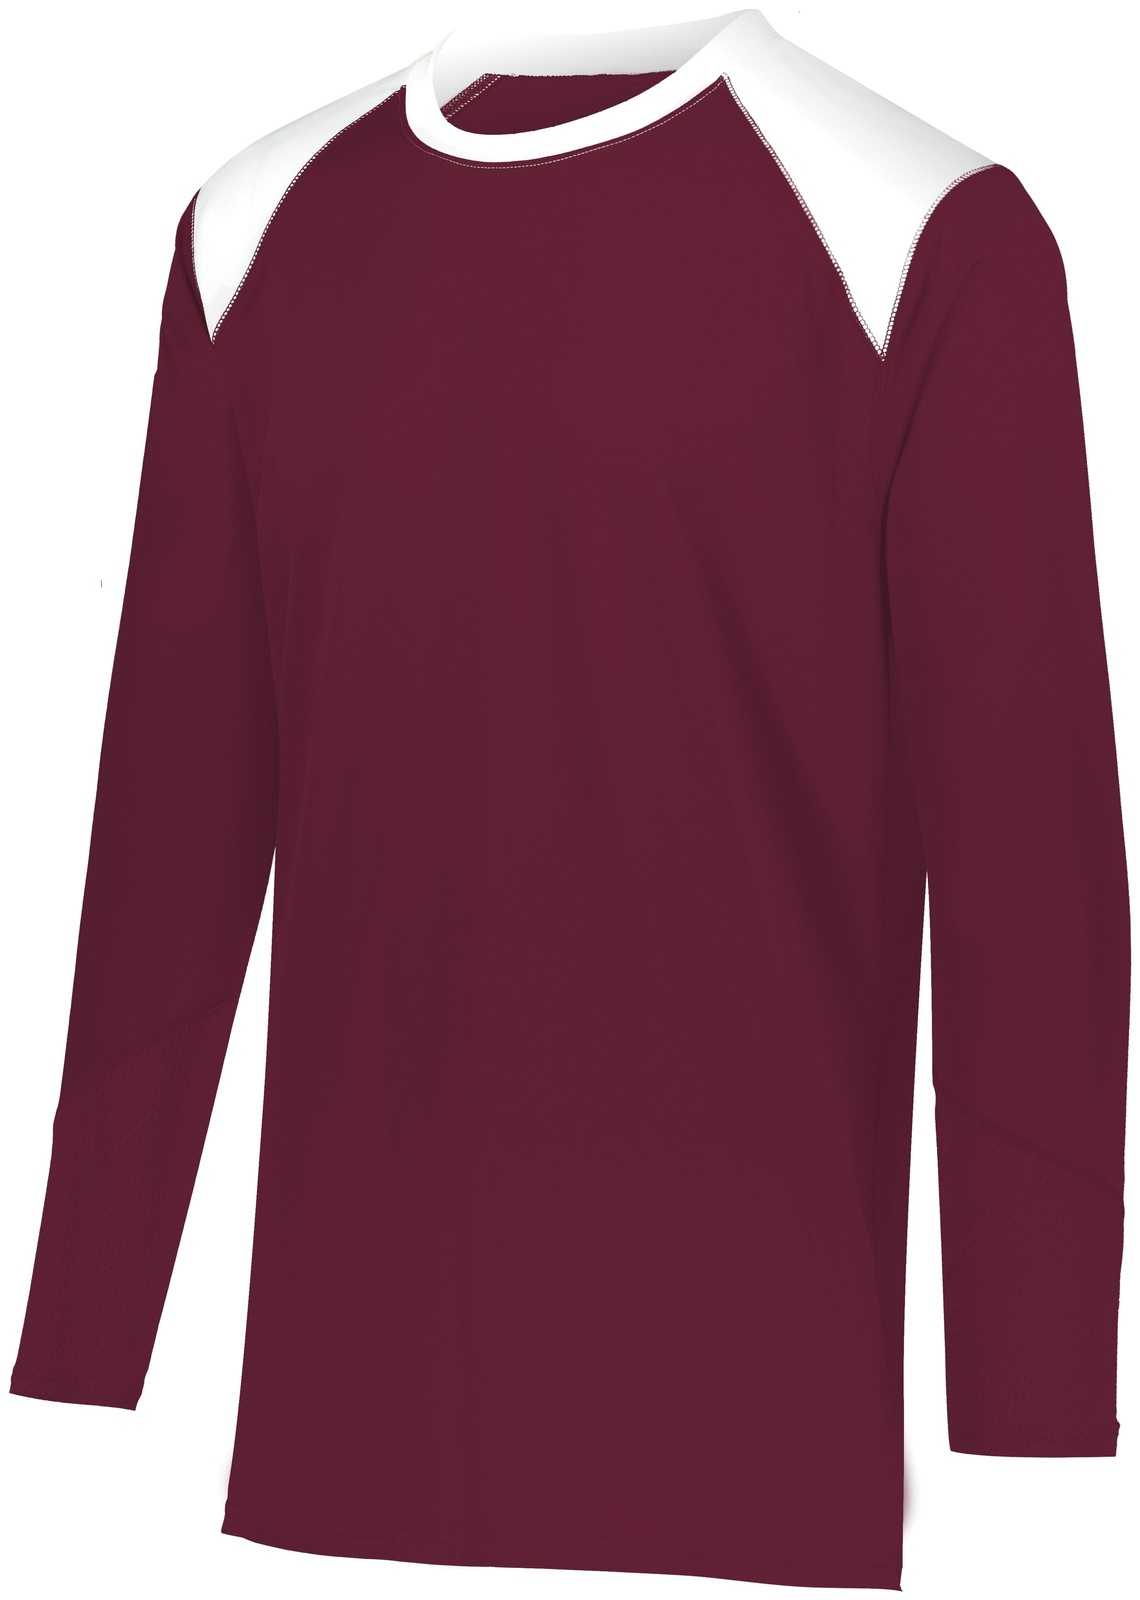 Augusta 1729 Youth Tip-Off Shooter Shirt - Maroon White - HIT a Double